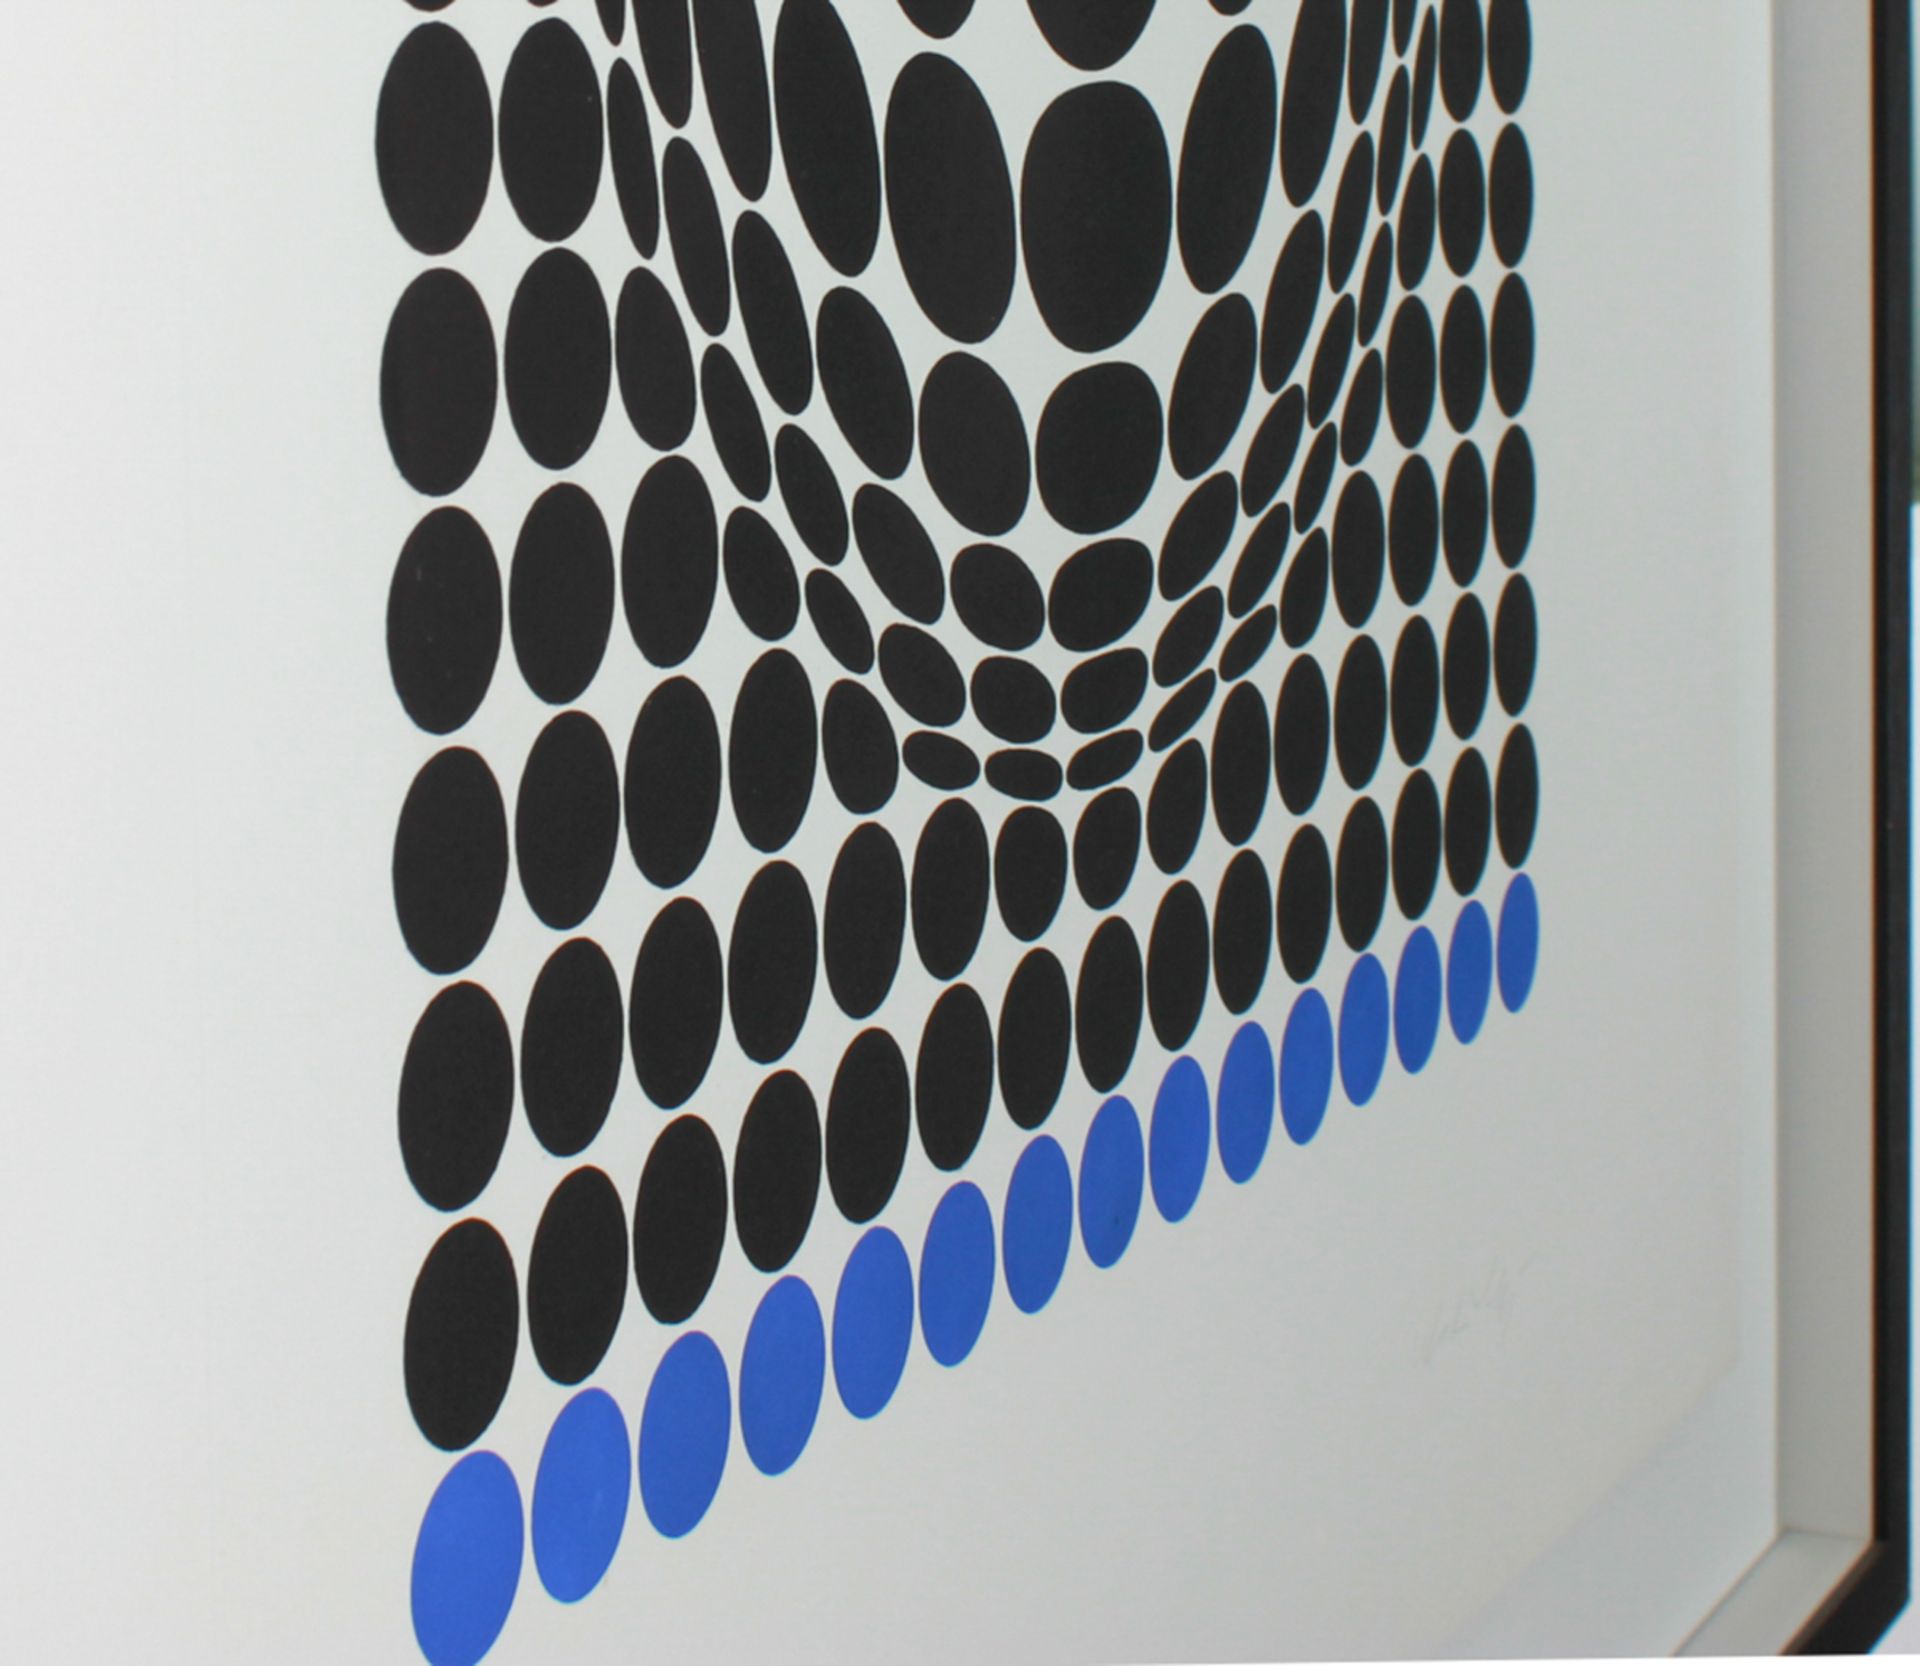 Victor Vasarely (1906 - 1997) - Image 5 of 8